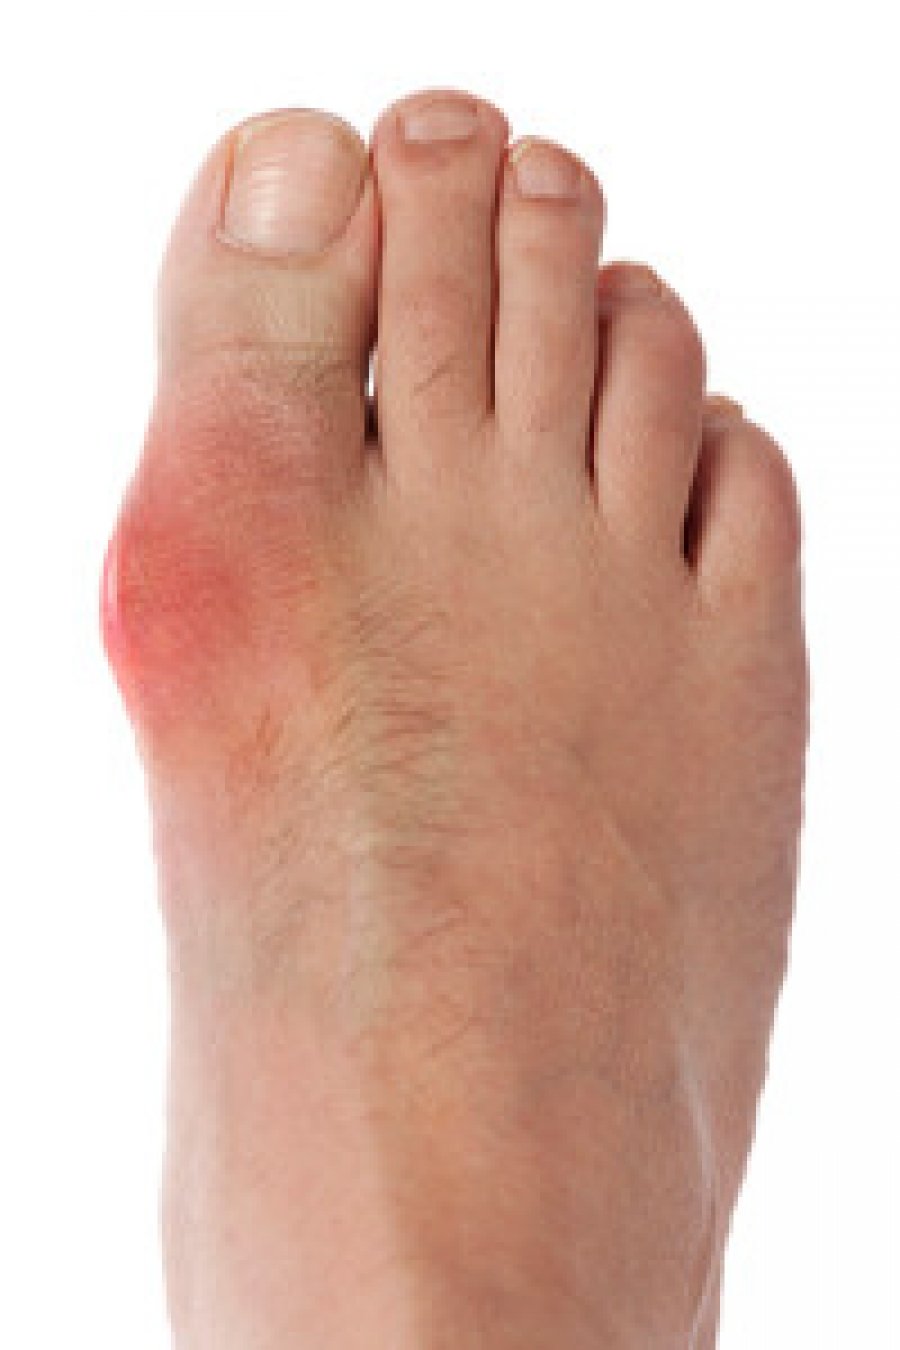 How Does A Gout Attack Happen?